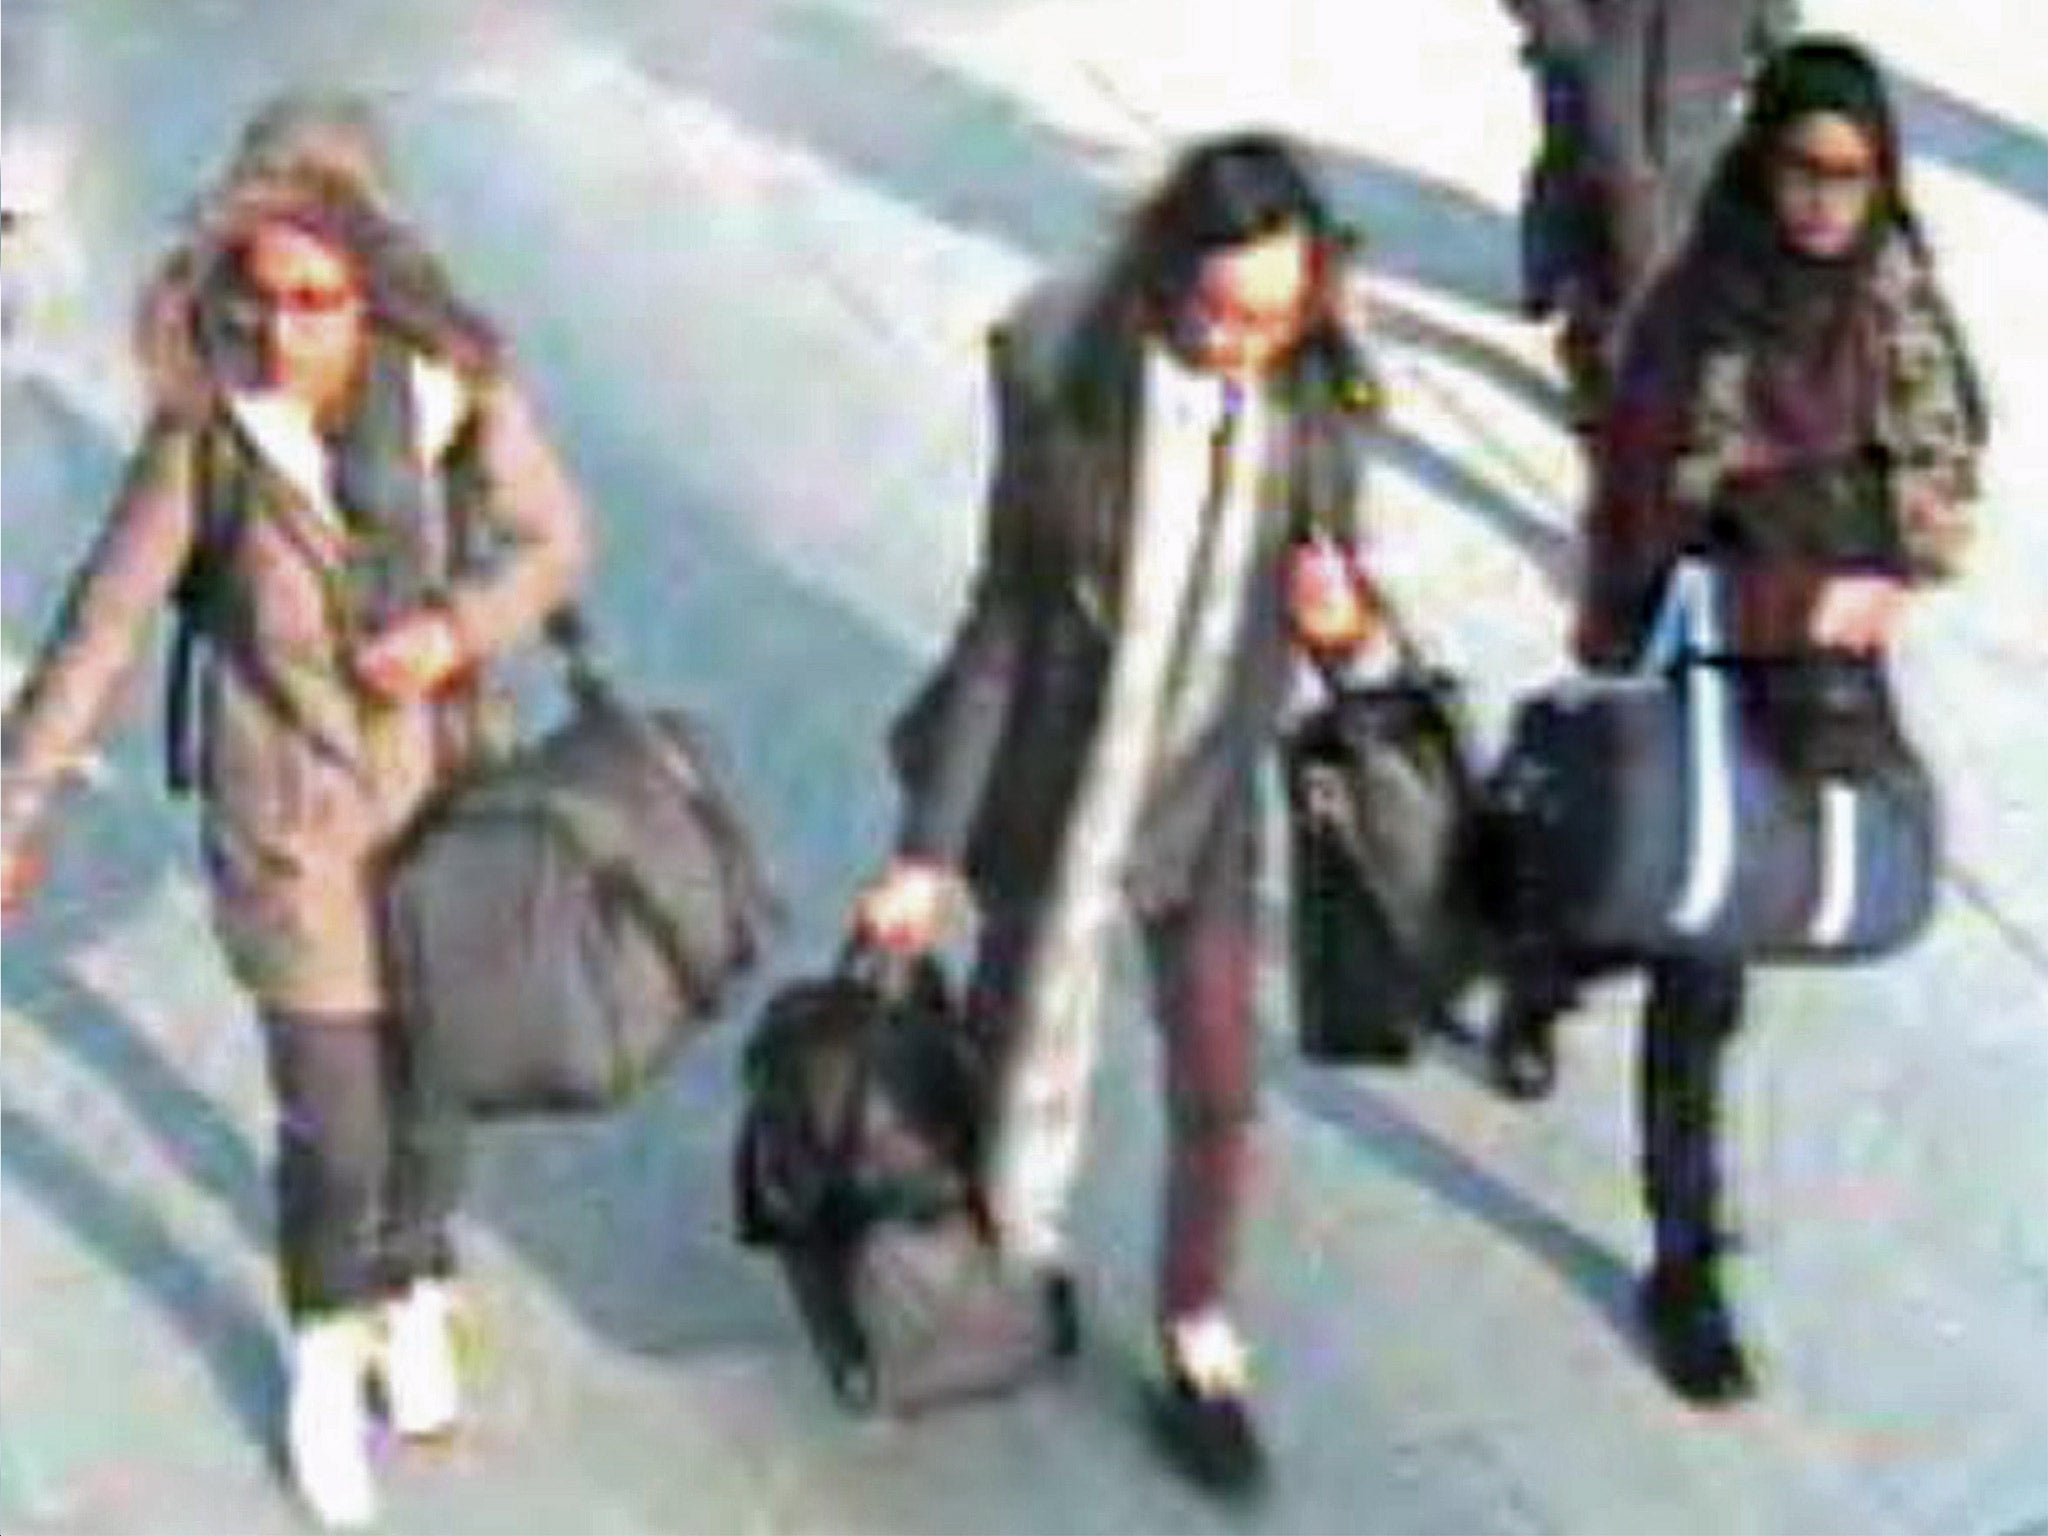 Left to right: Amira Abase, Kadiza Sultana and Shamima Begum waught on CCTV at Gatwick airport on their way to Syrica via Turkey last month